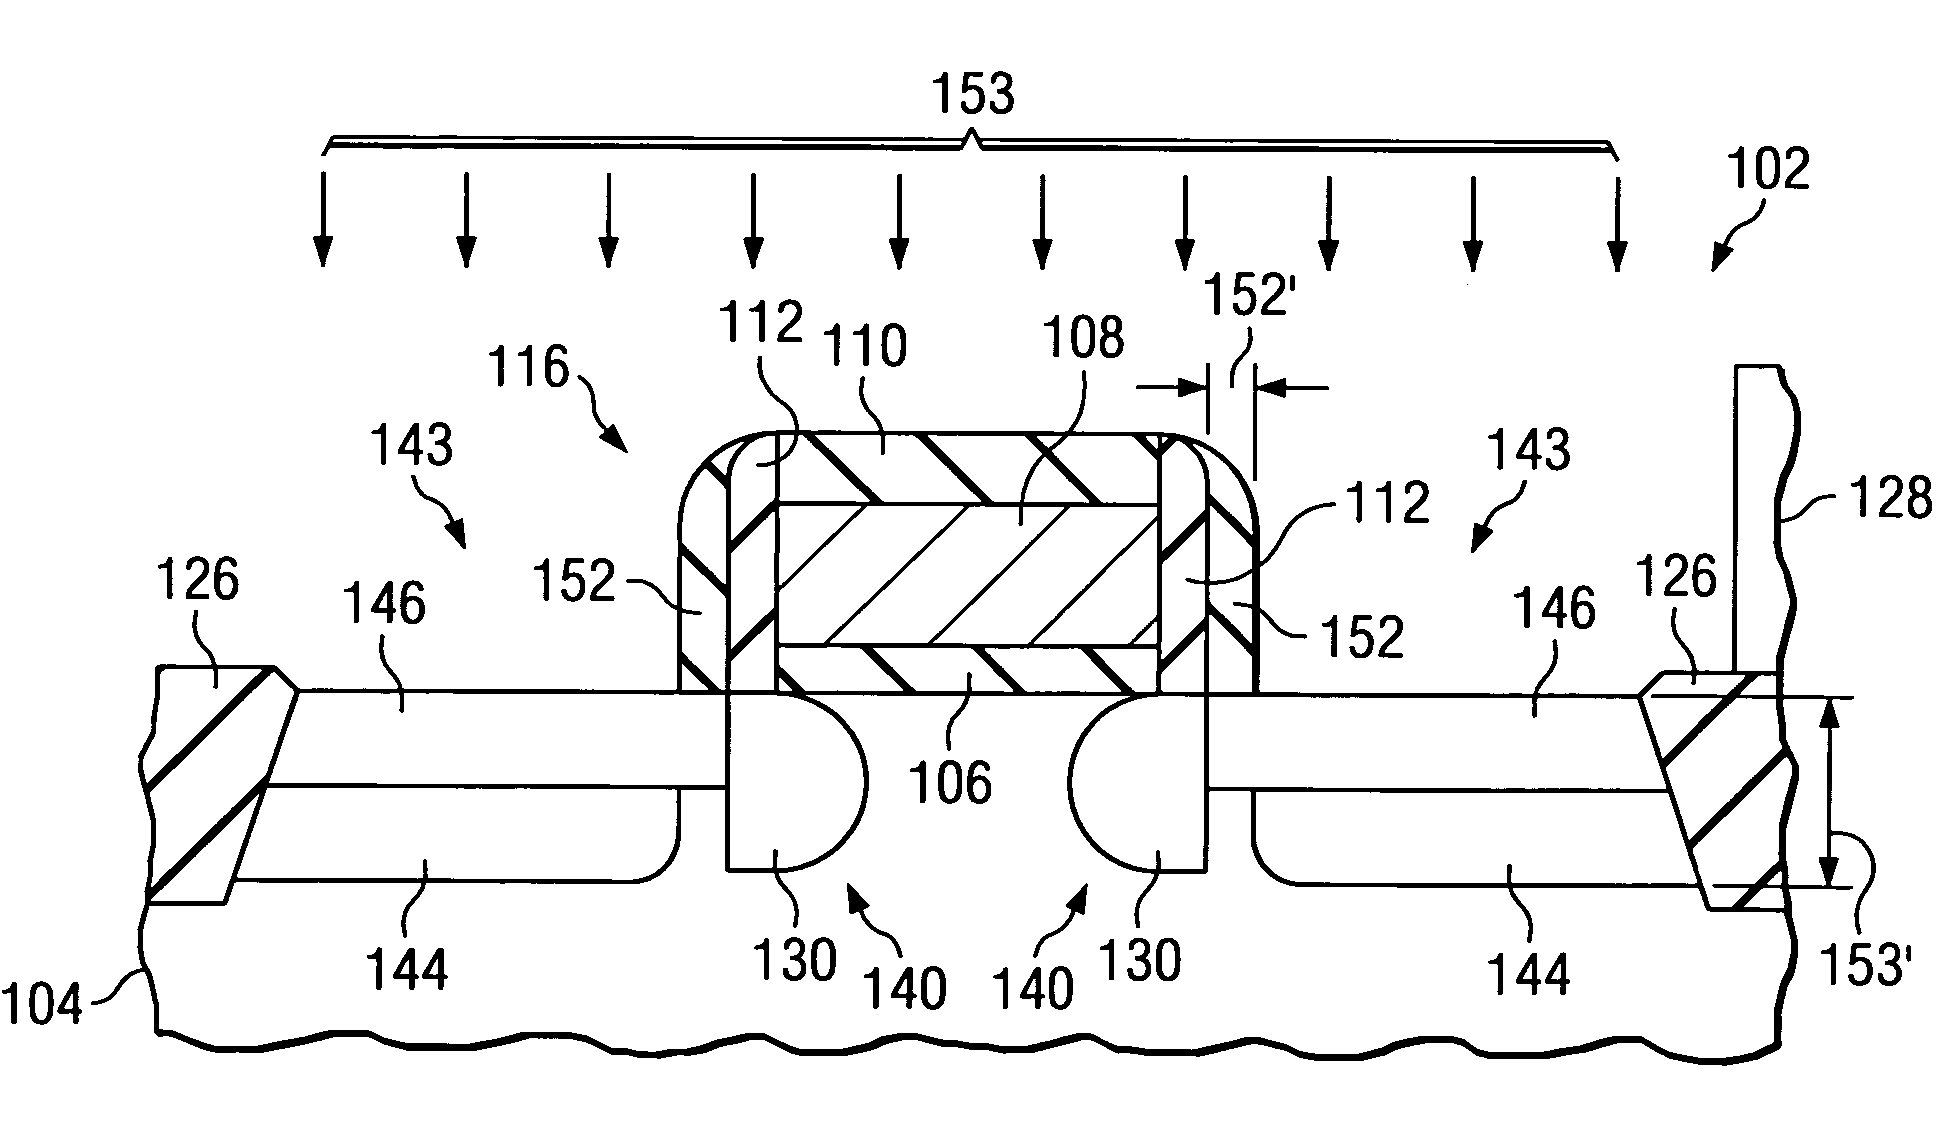 Method to produce localized halo for MOS transistor